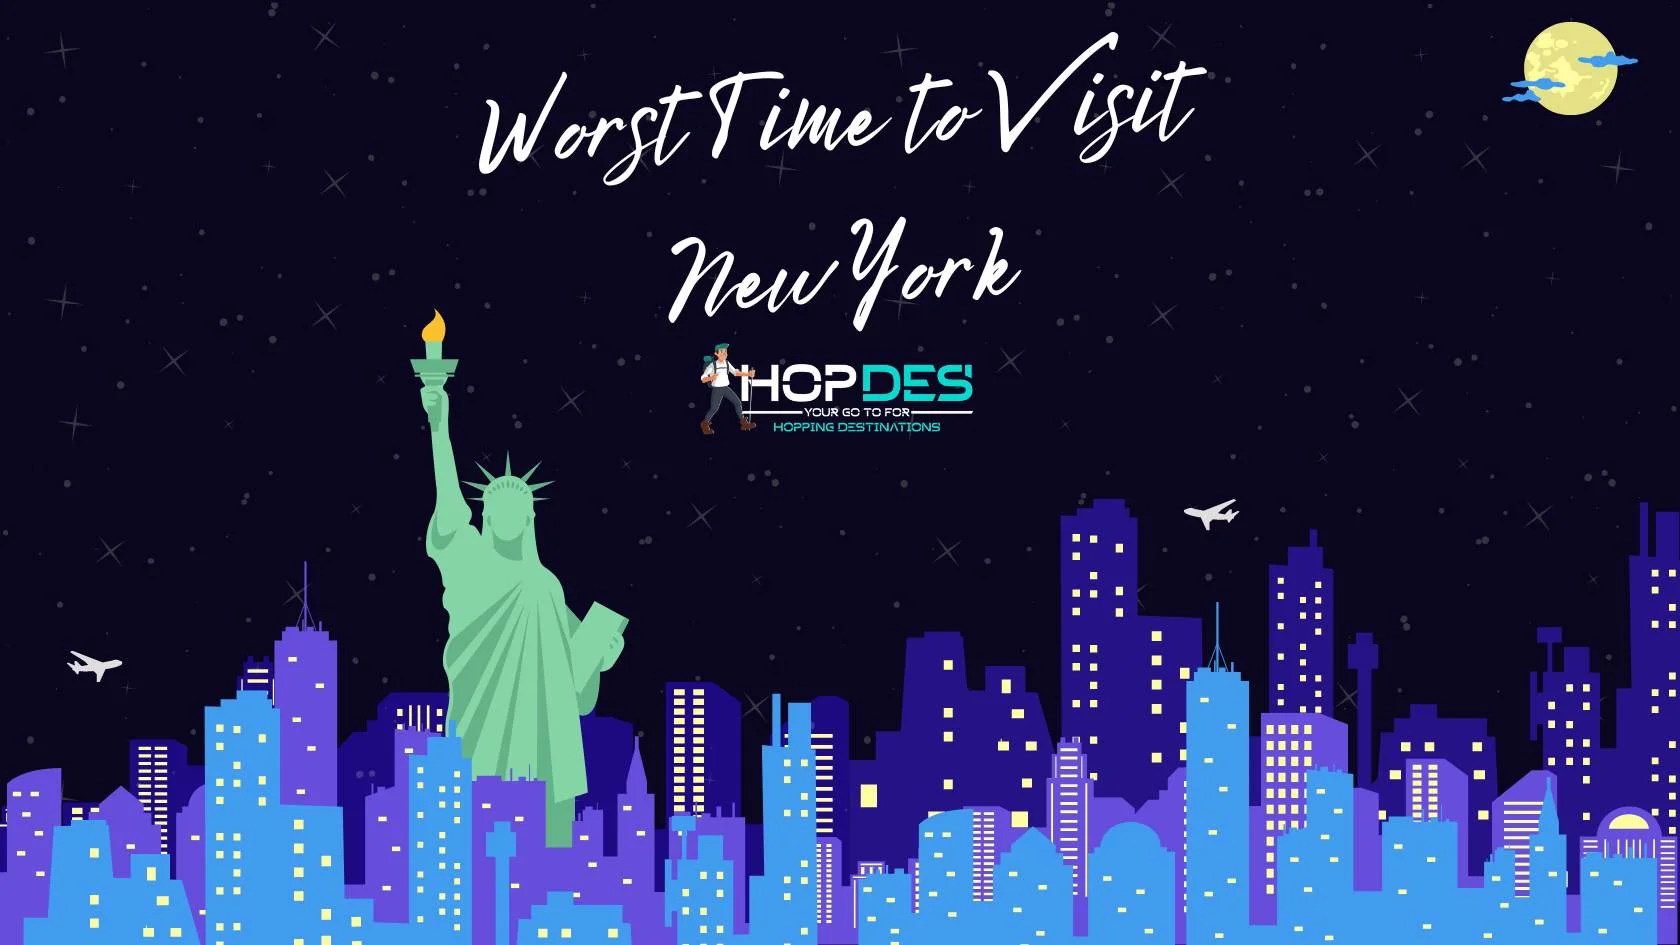 Best Times to Visit New York City